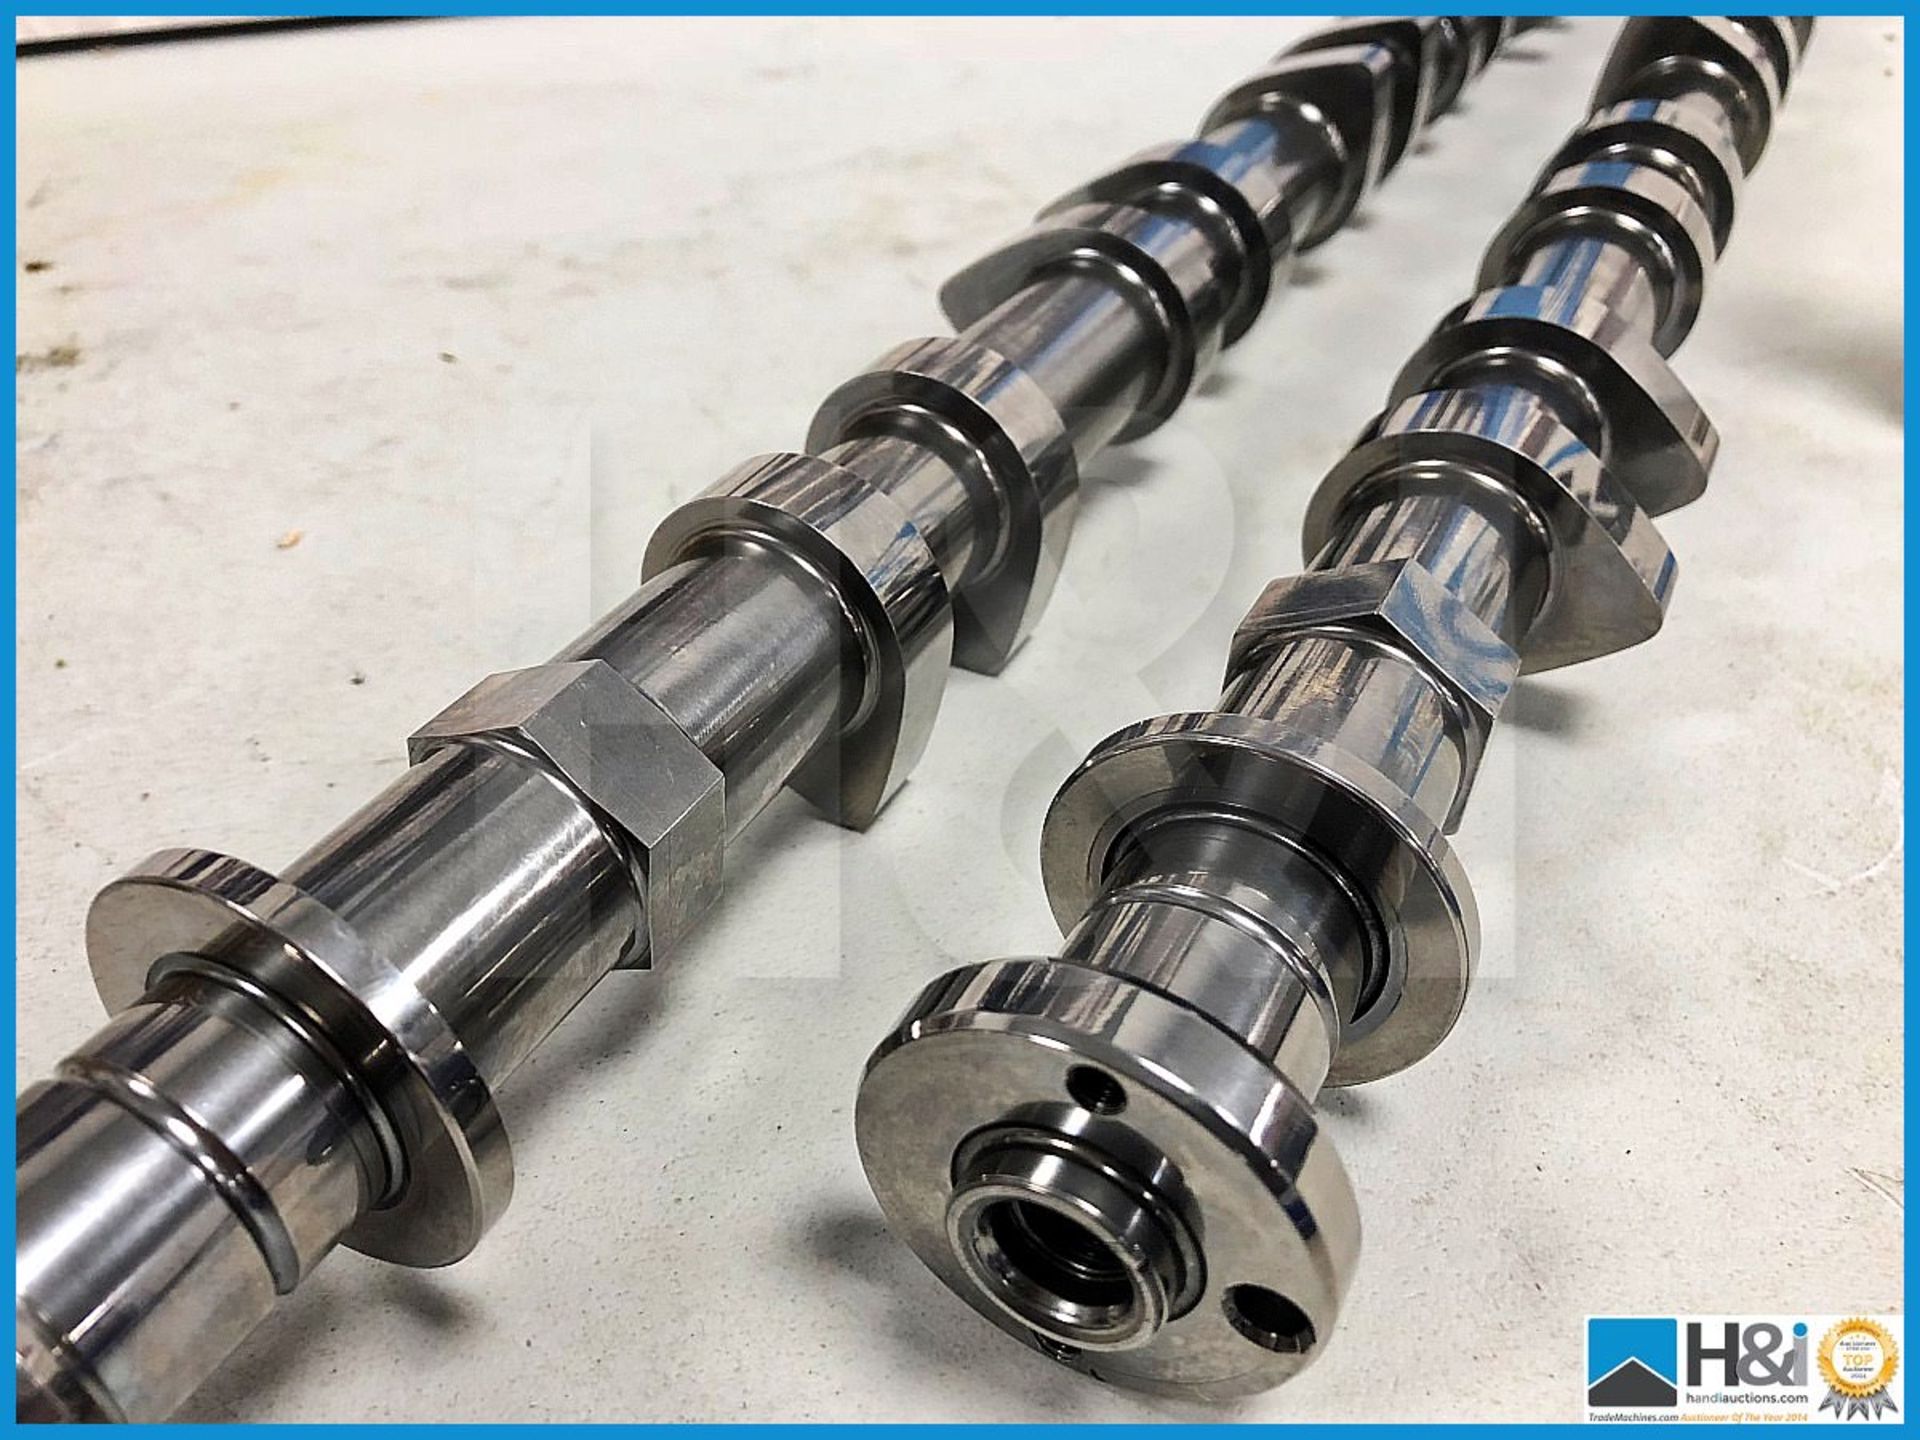 Cosworth JK RH and LH inlet camshafts AM18. Code: 20007562 and 20007563. Lot 259 & 260. RRP GBP 4,20 - Image 4 of 4